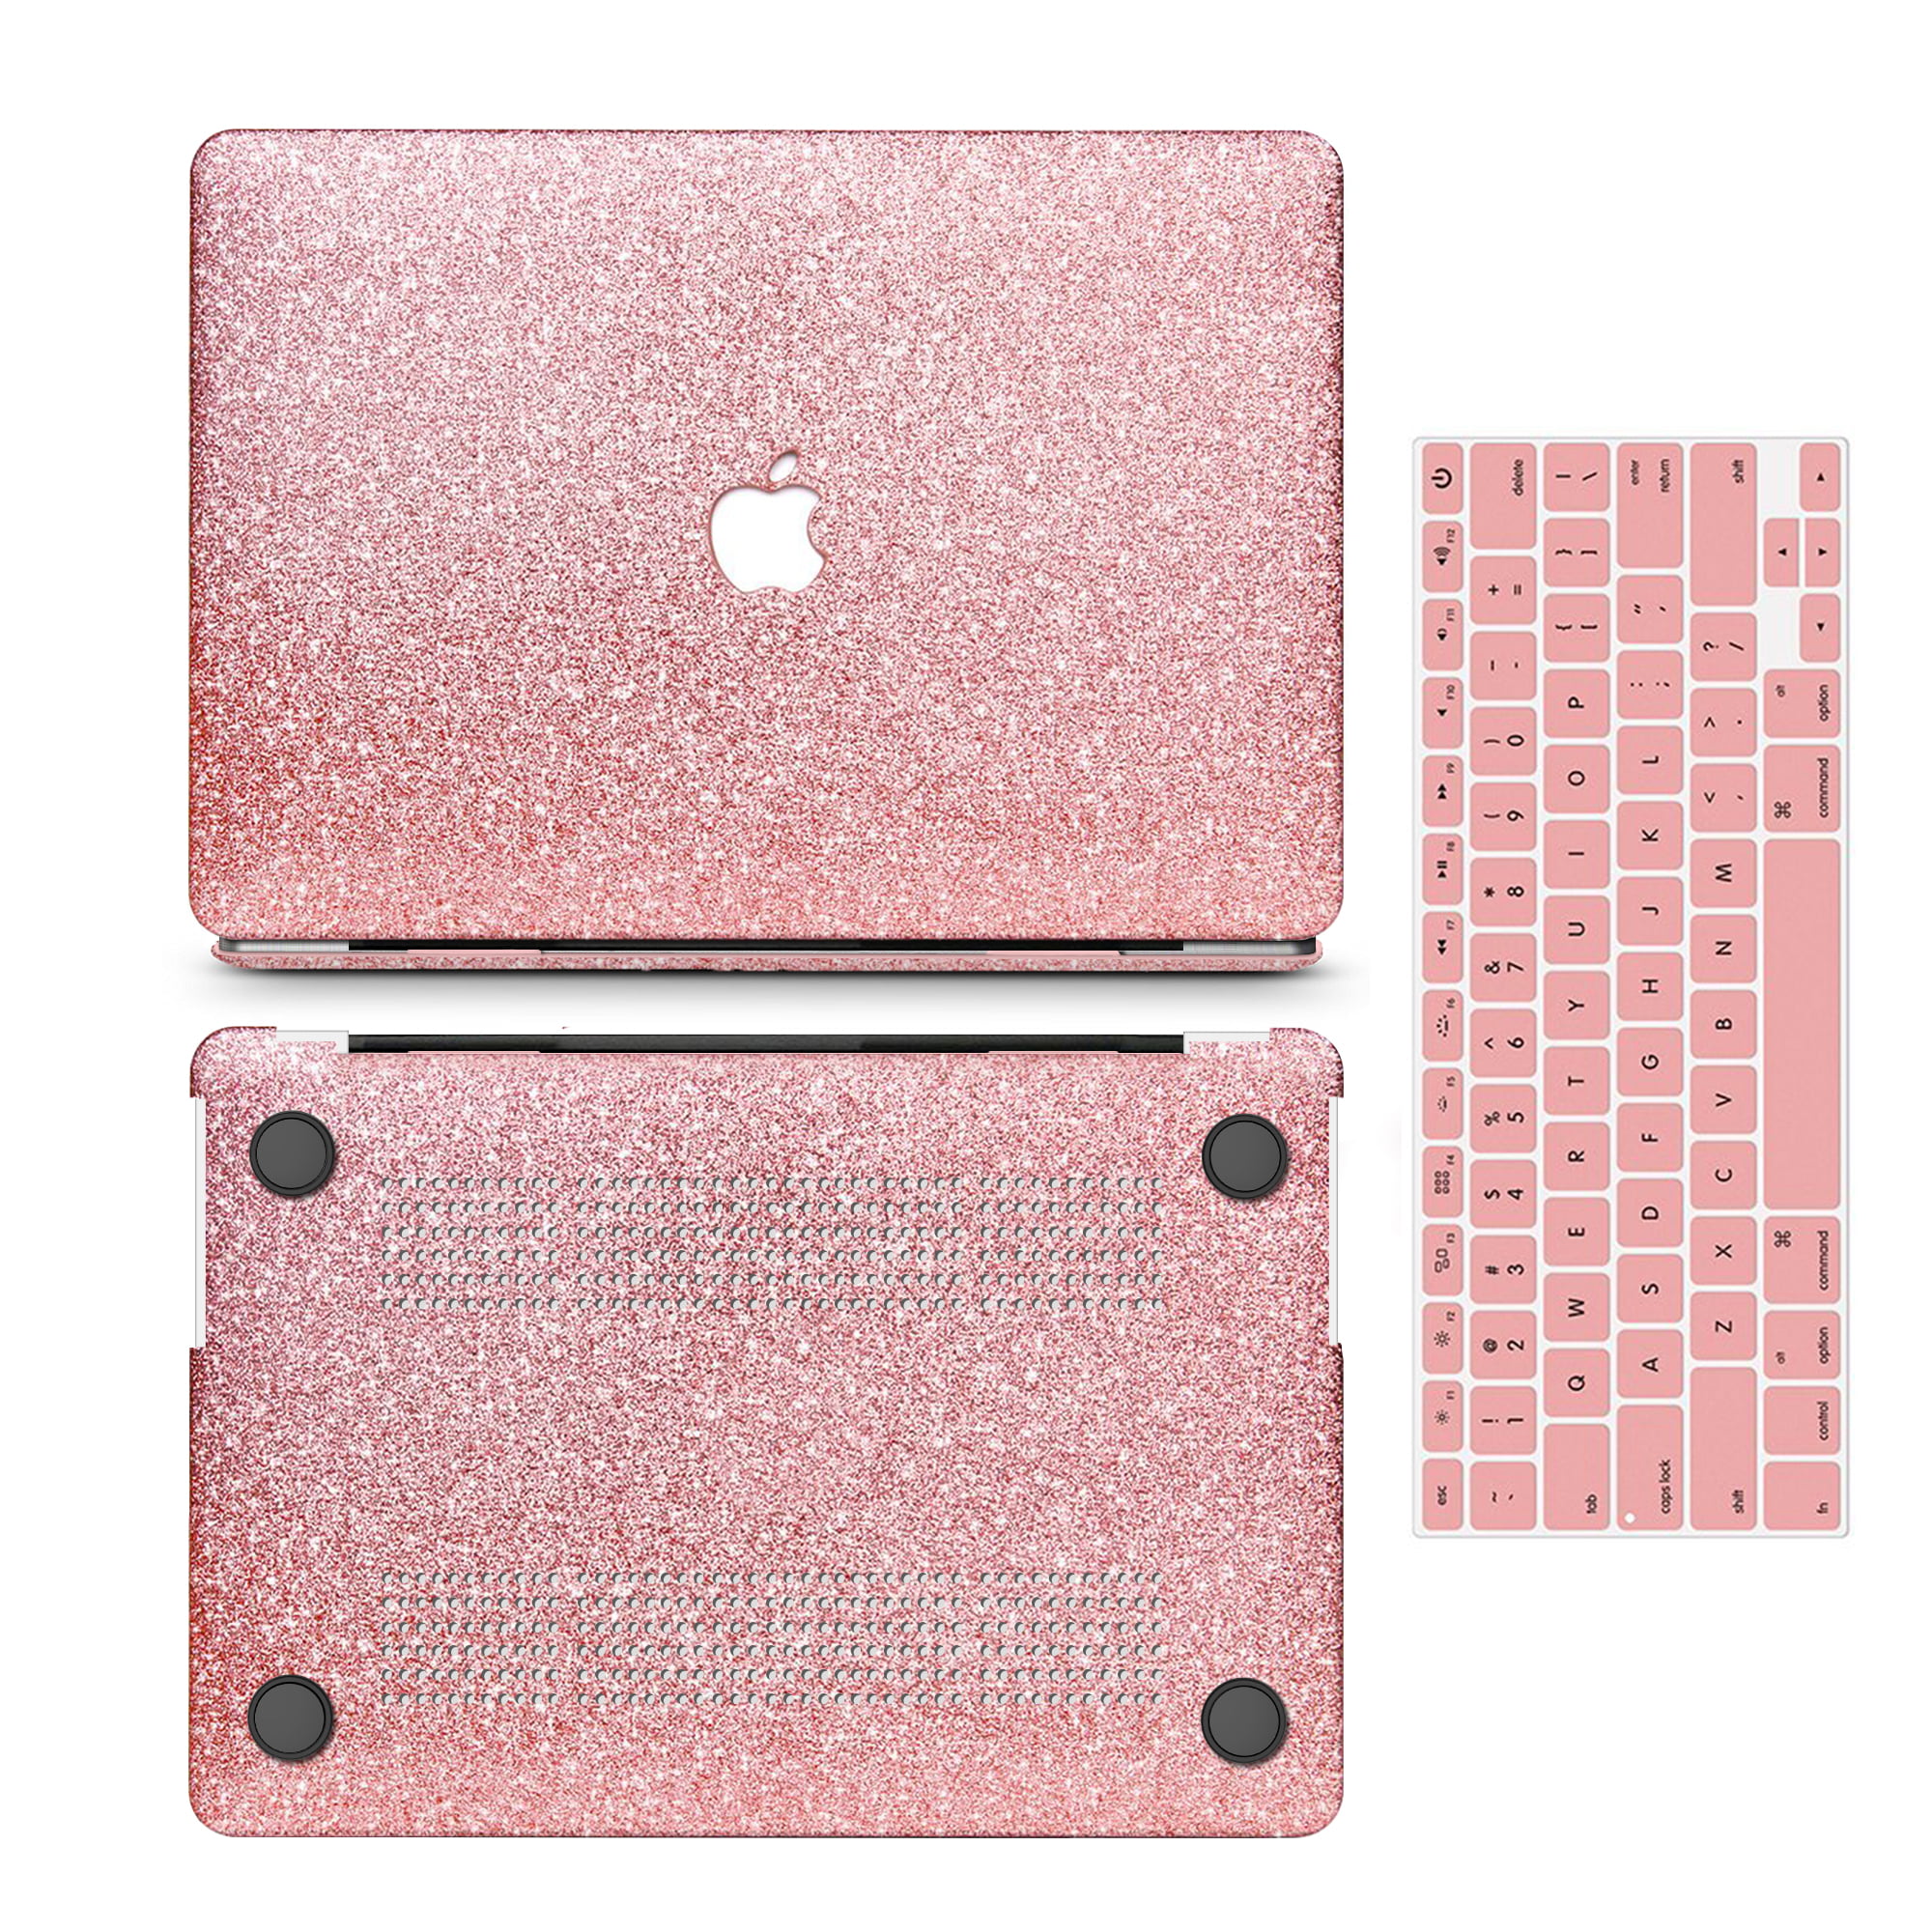 MacBook Air 13 Inch Case 2018 Release A1932 Anban Glitter Bling Smooth Protective Laptop Shell Slim Snap On Case with Keyboard Cover Compatible for MacBook Air 13 with Retina Display Rose Gold 